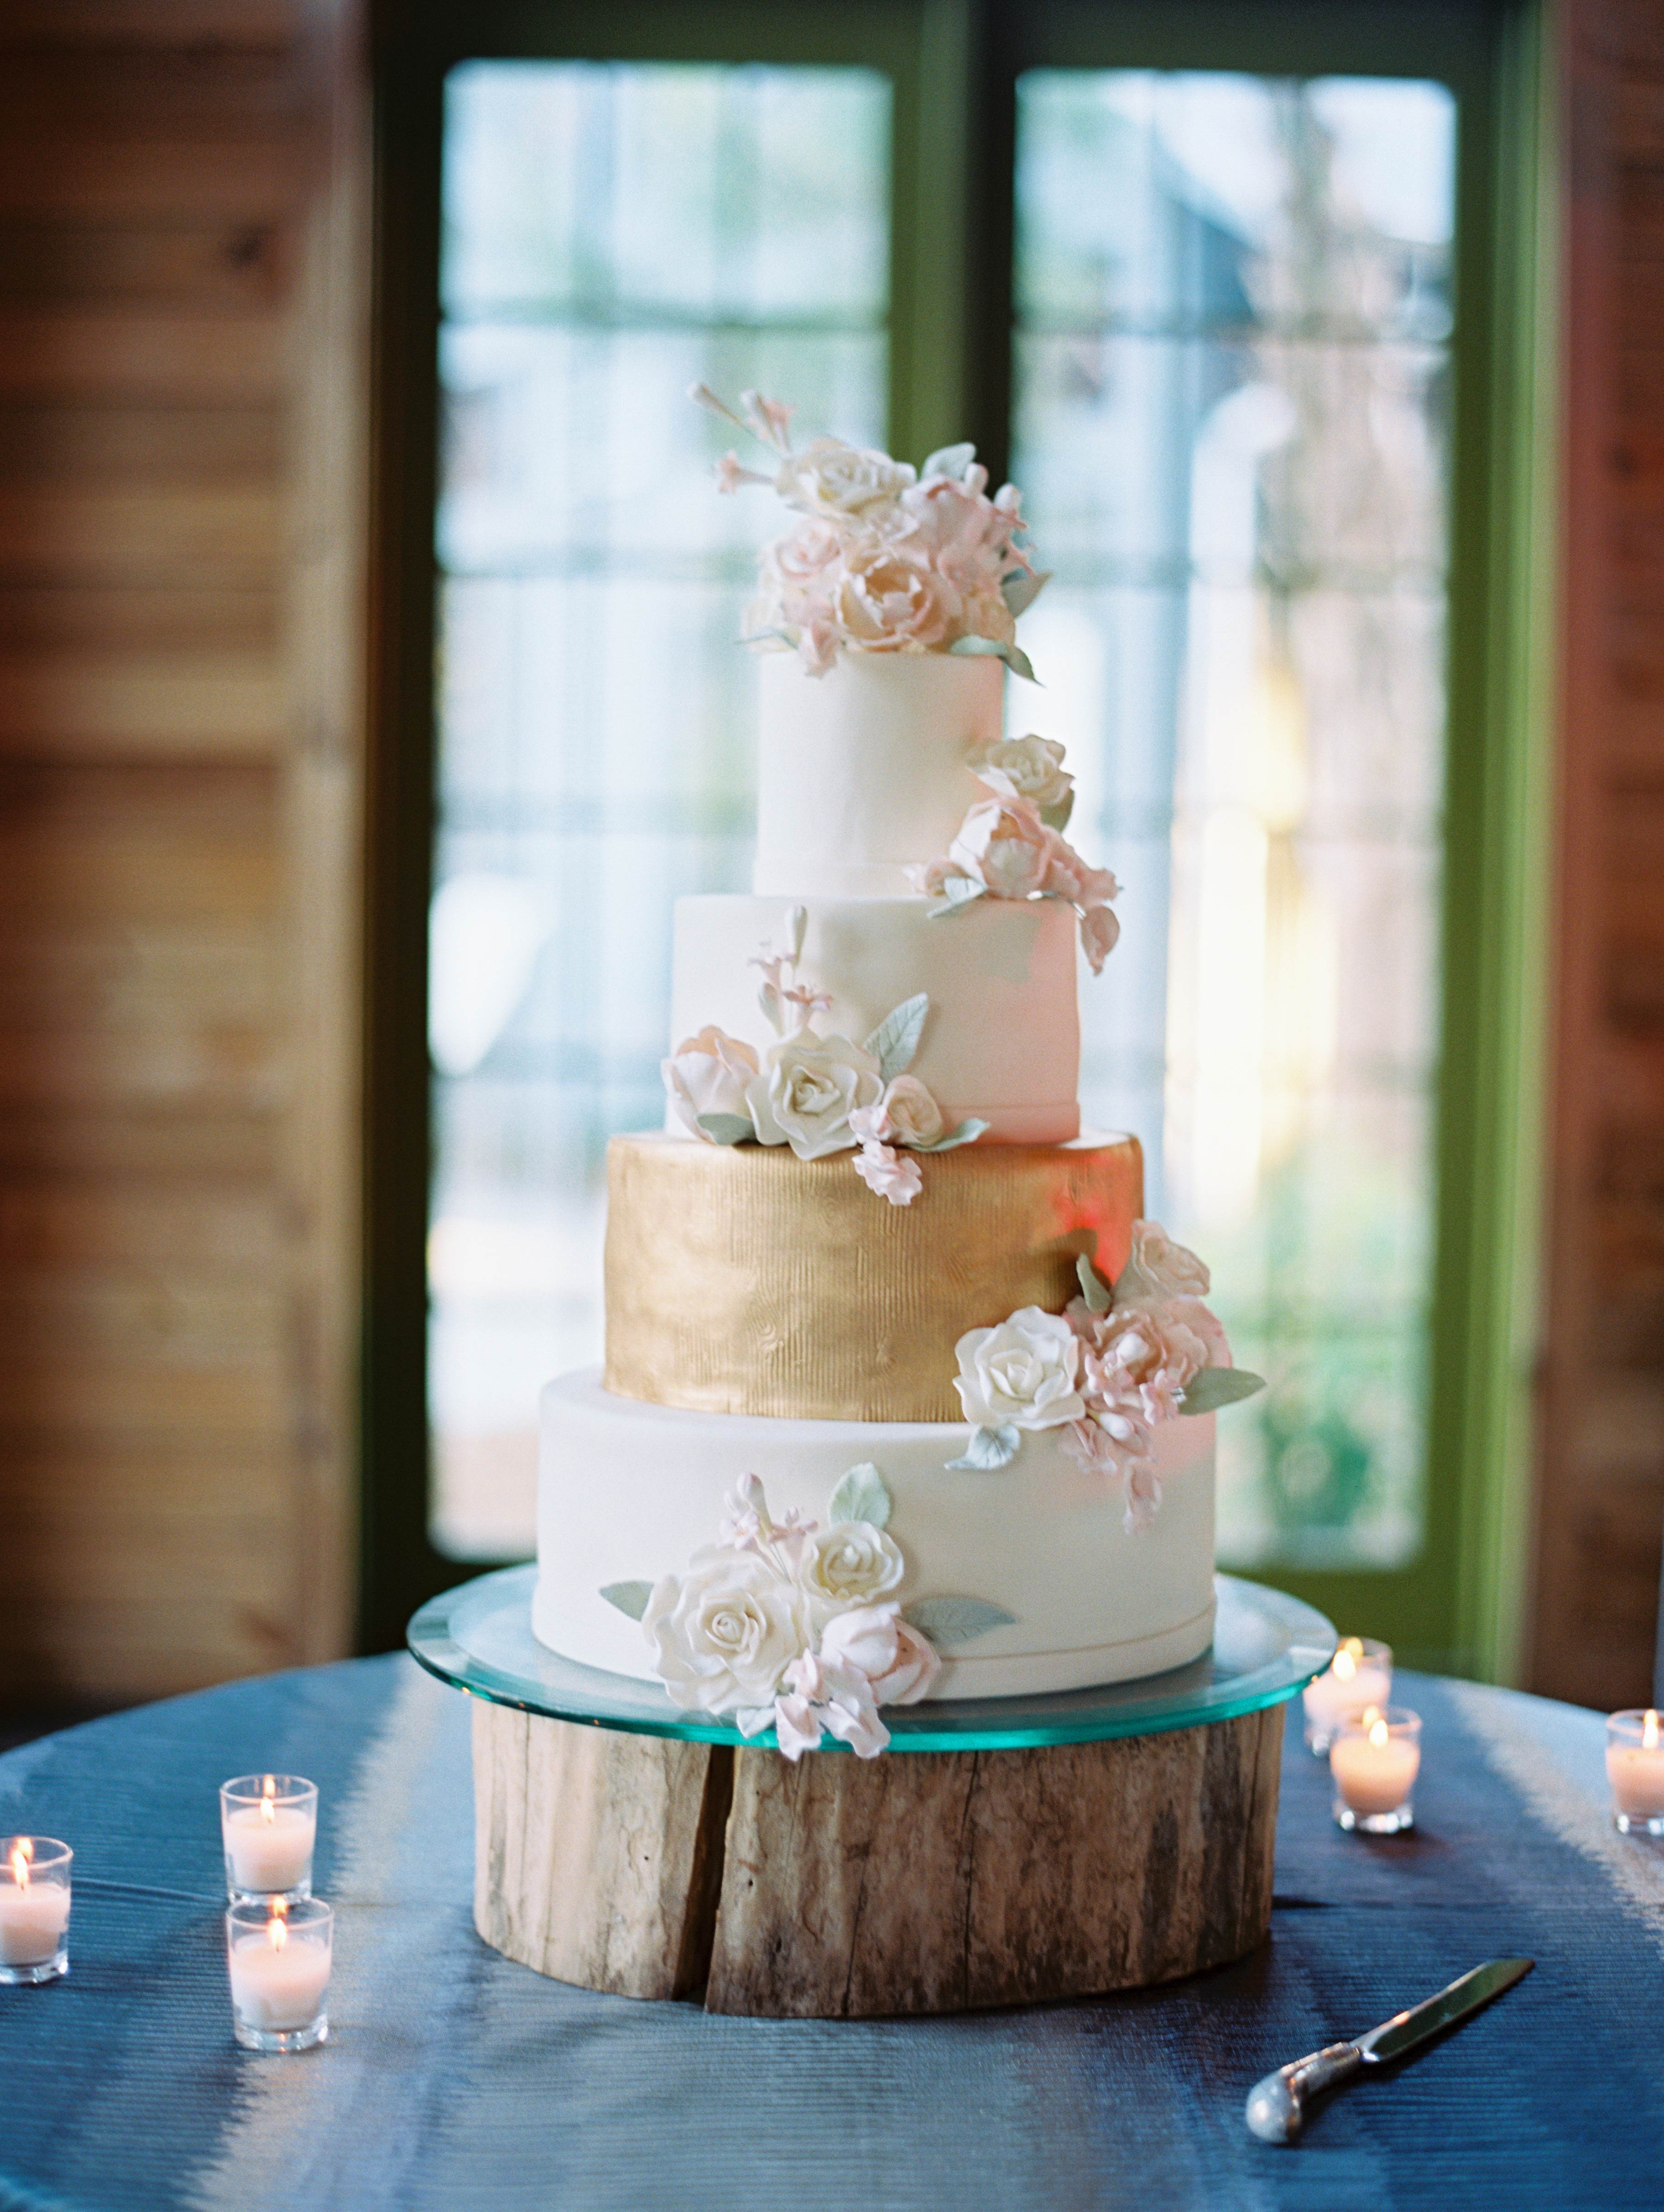 Wedding Cakes with Sugar Flowers That Look Incredibly Real ...